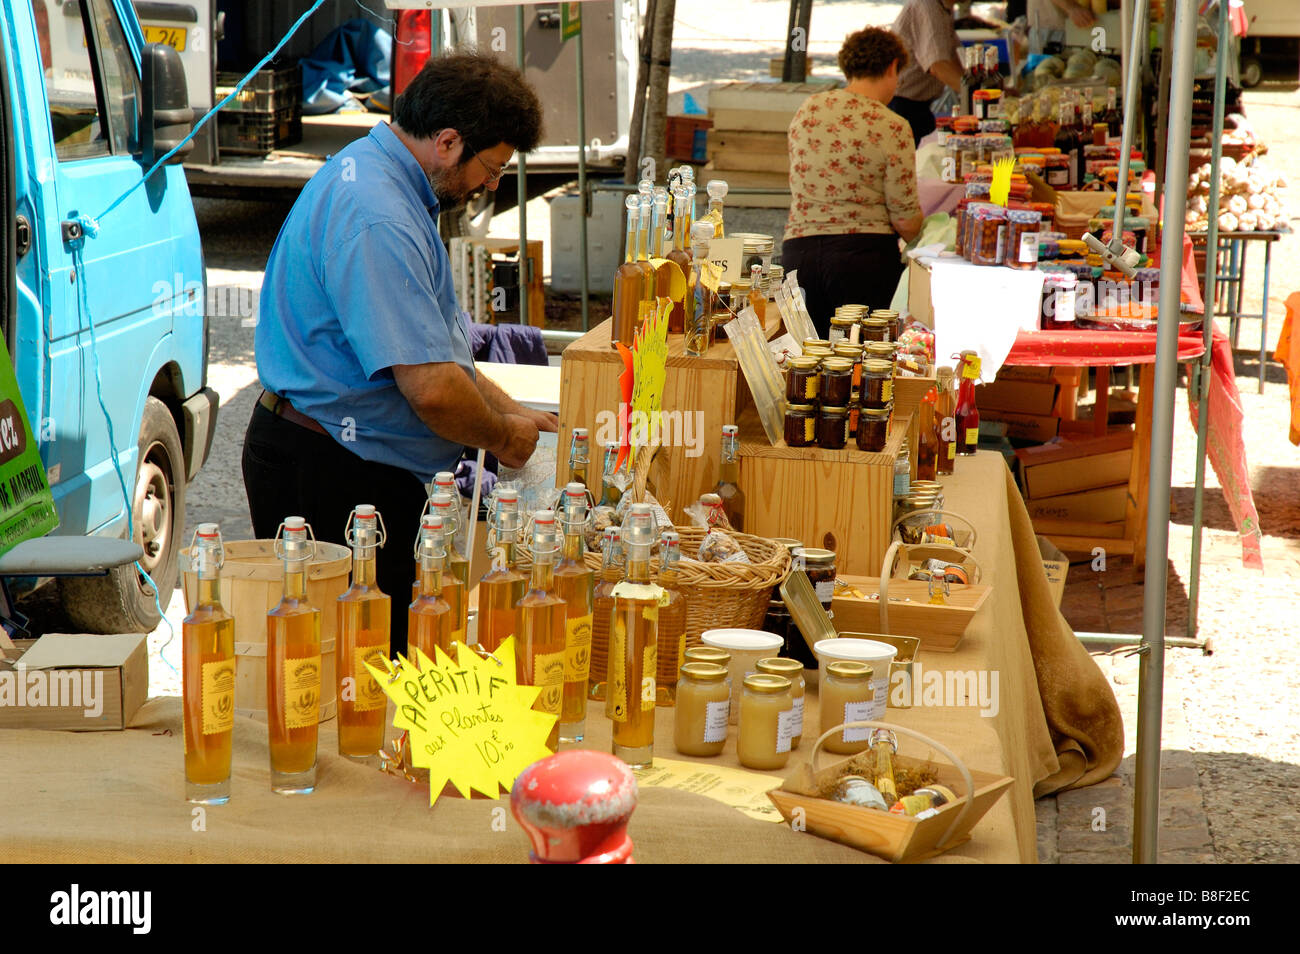 Local market stall (selling Truffles and truffle products, honey etc), Brantome, Dordogne, France. Stock Photo